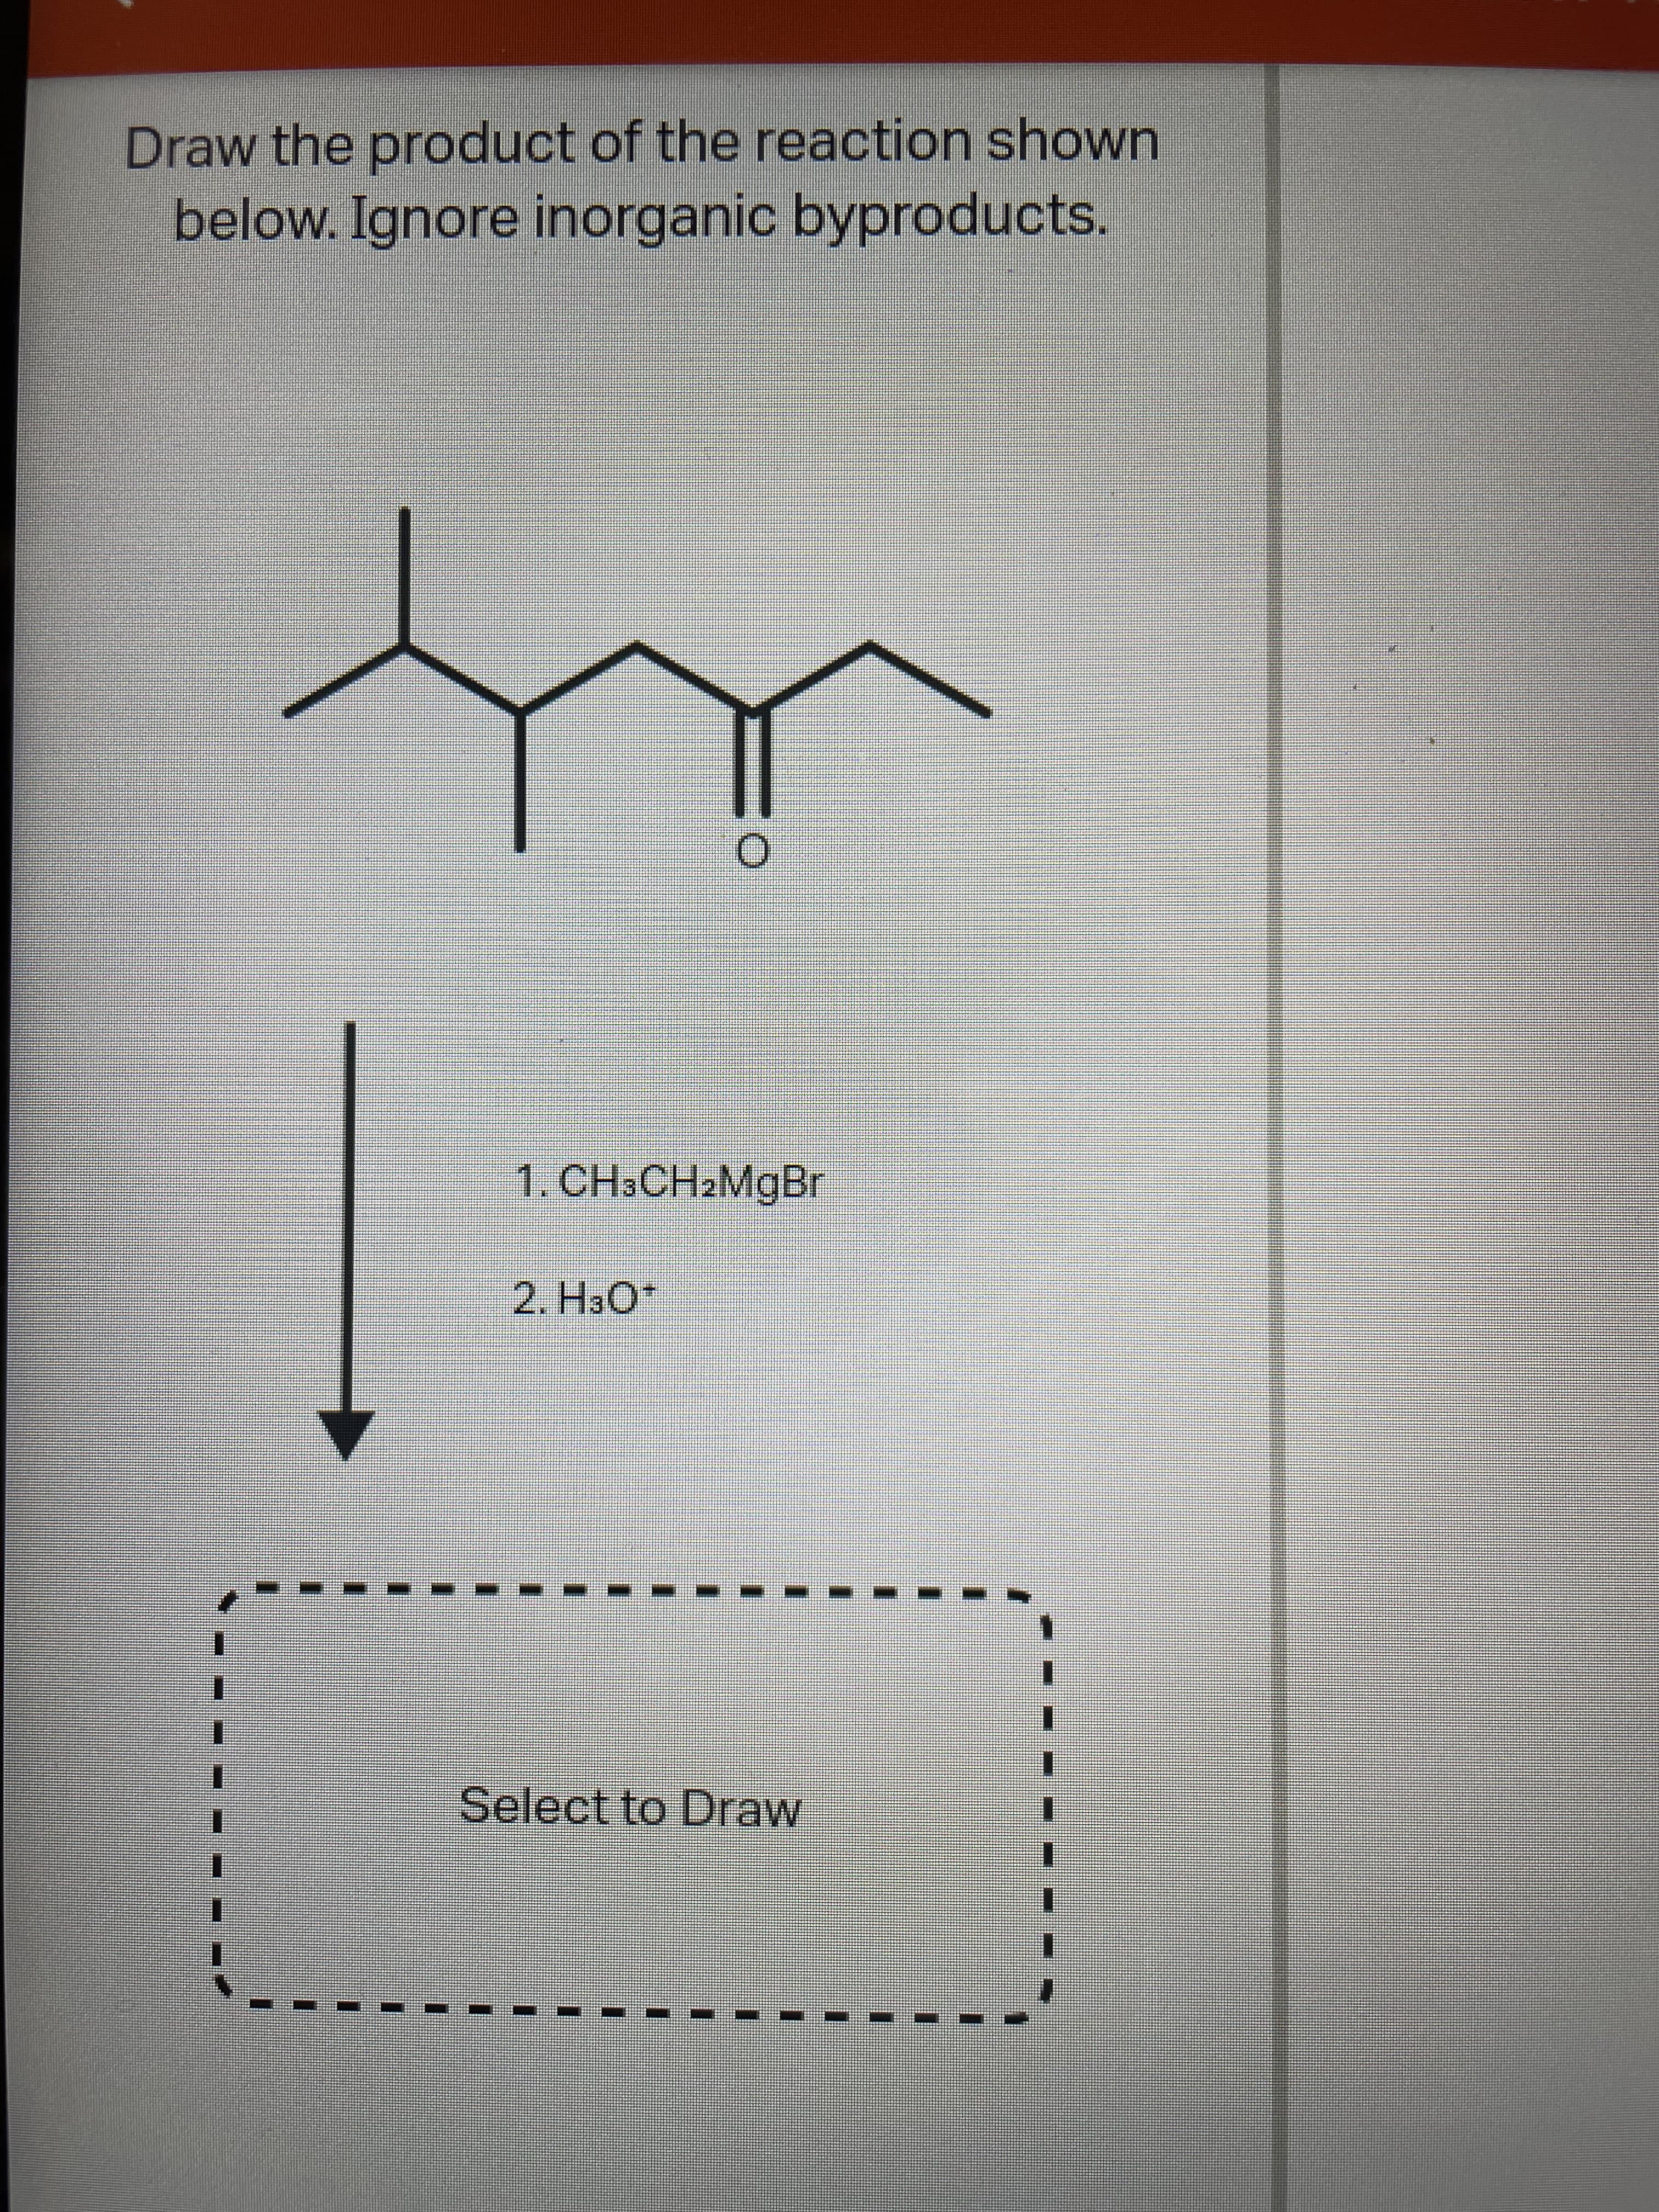 Draw the product of the reaction shown
below. Ignore inorganic byproducts.
1. CH.CH2MGBR
2. H3O*
Select to Draw
